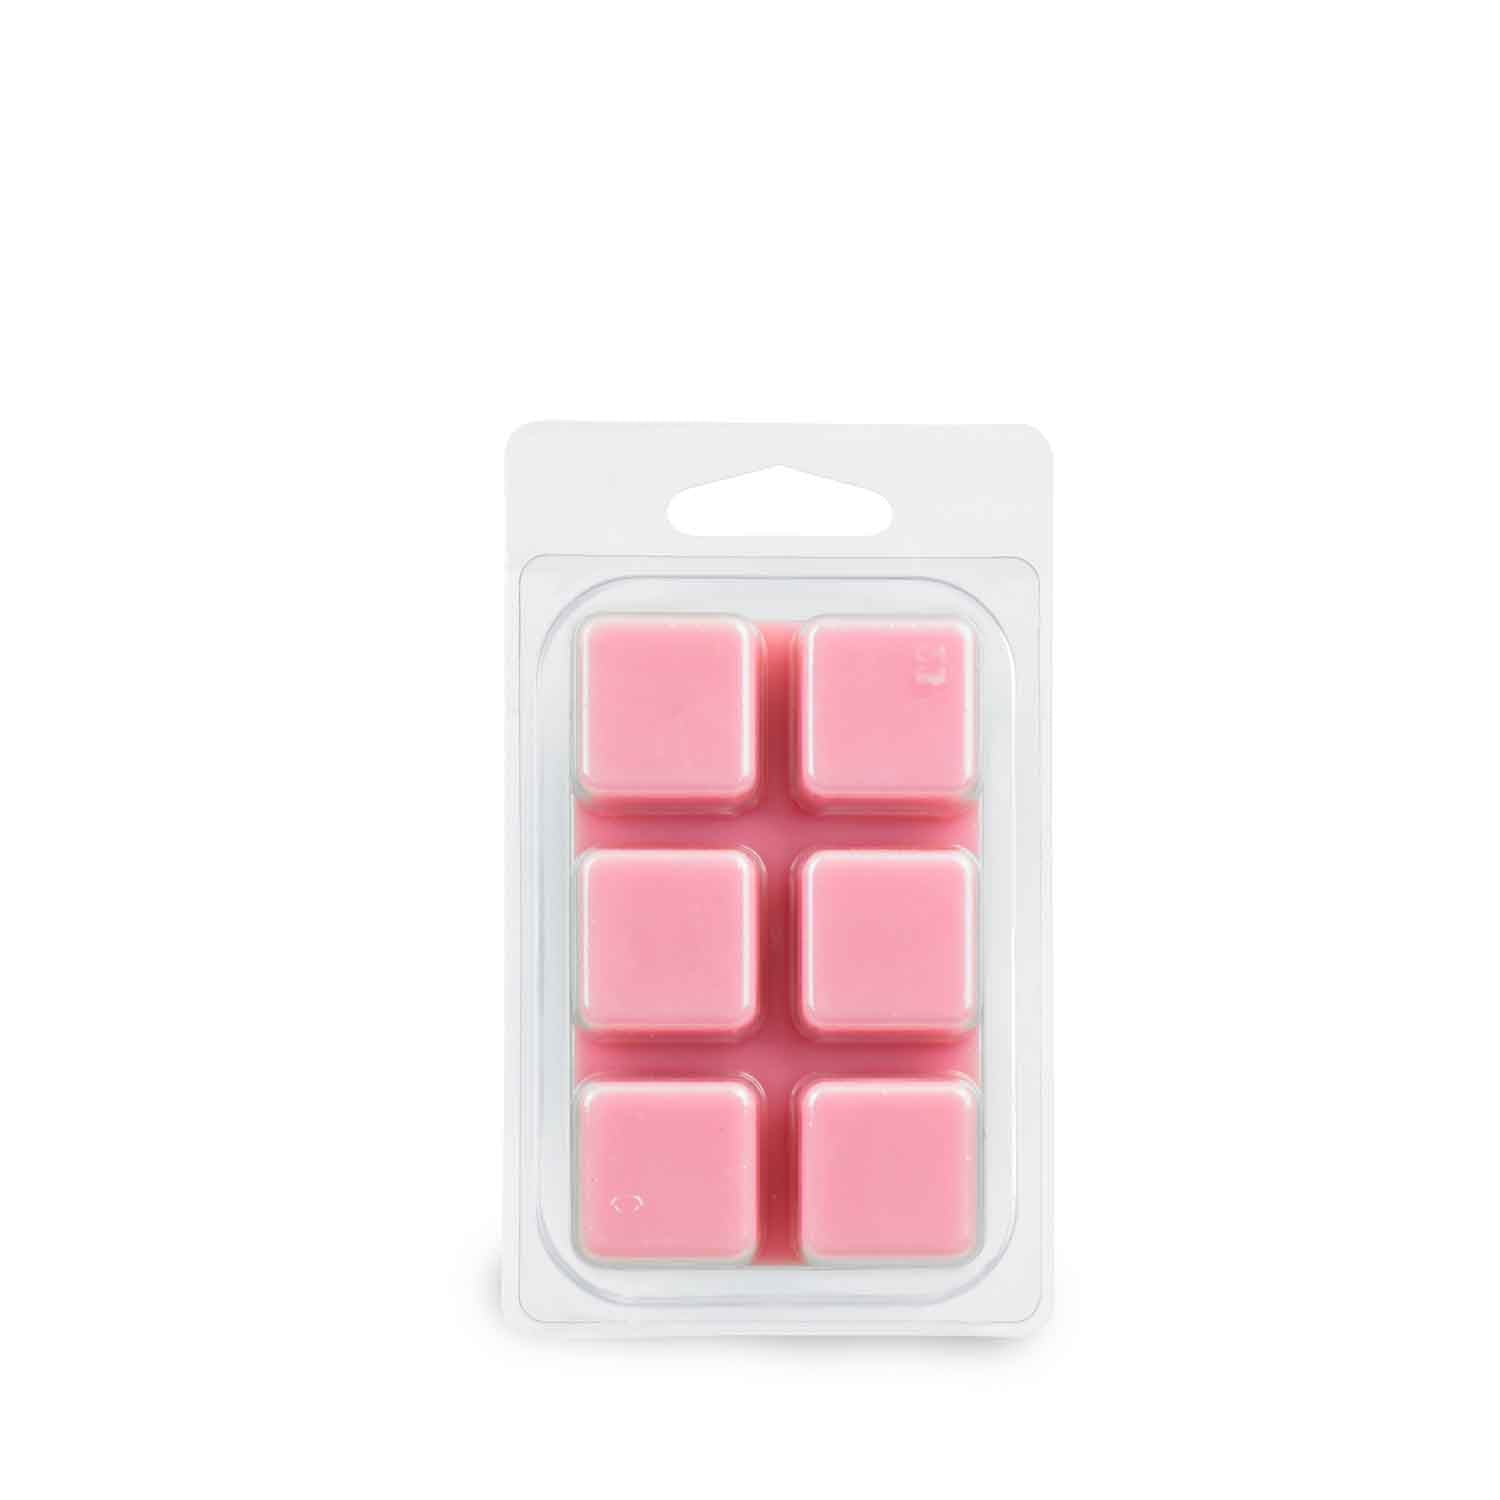 A pack of Blushed Bouquet Scented Wax Melt (2.5 oz) in a Tuscany Candle® package.